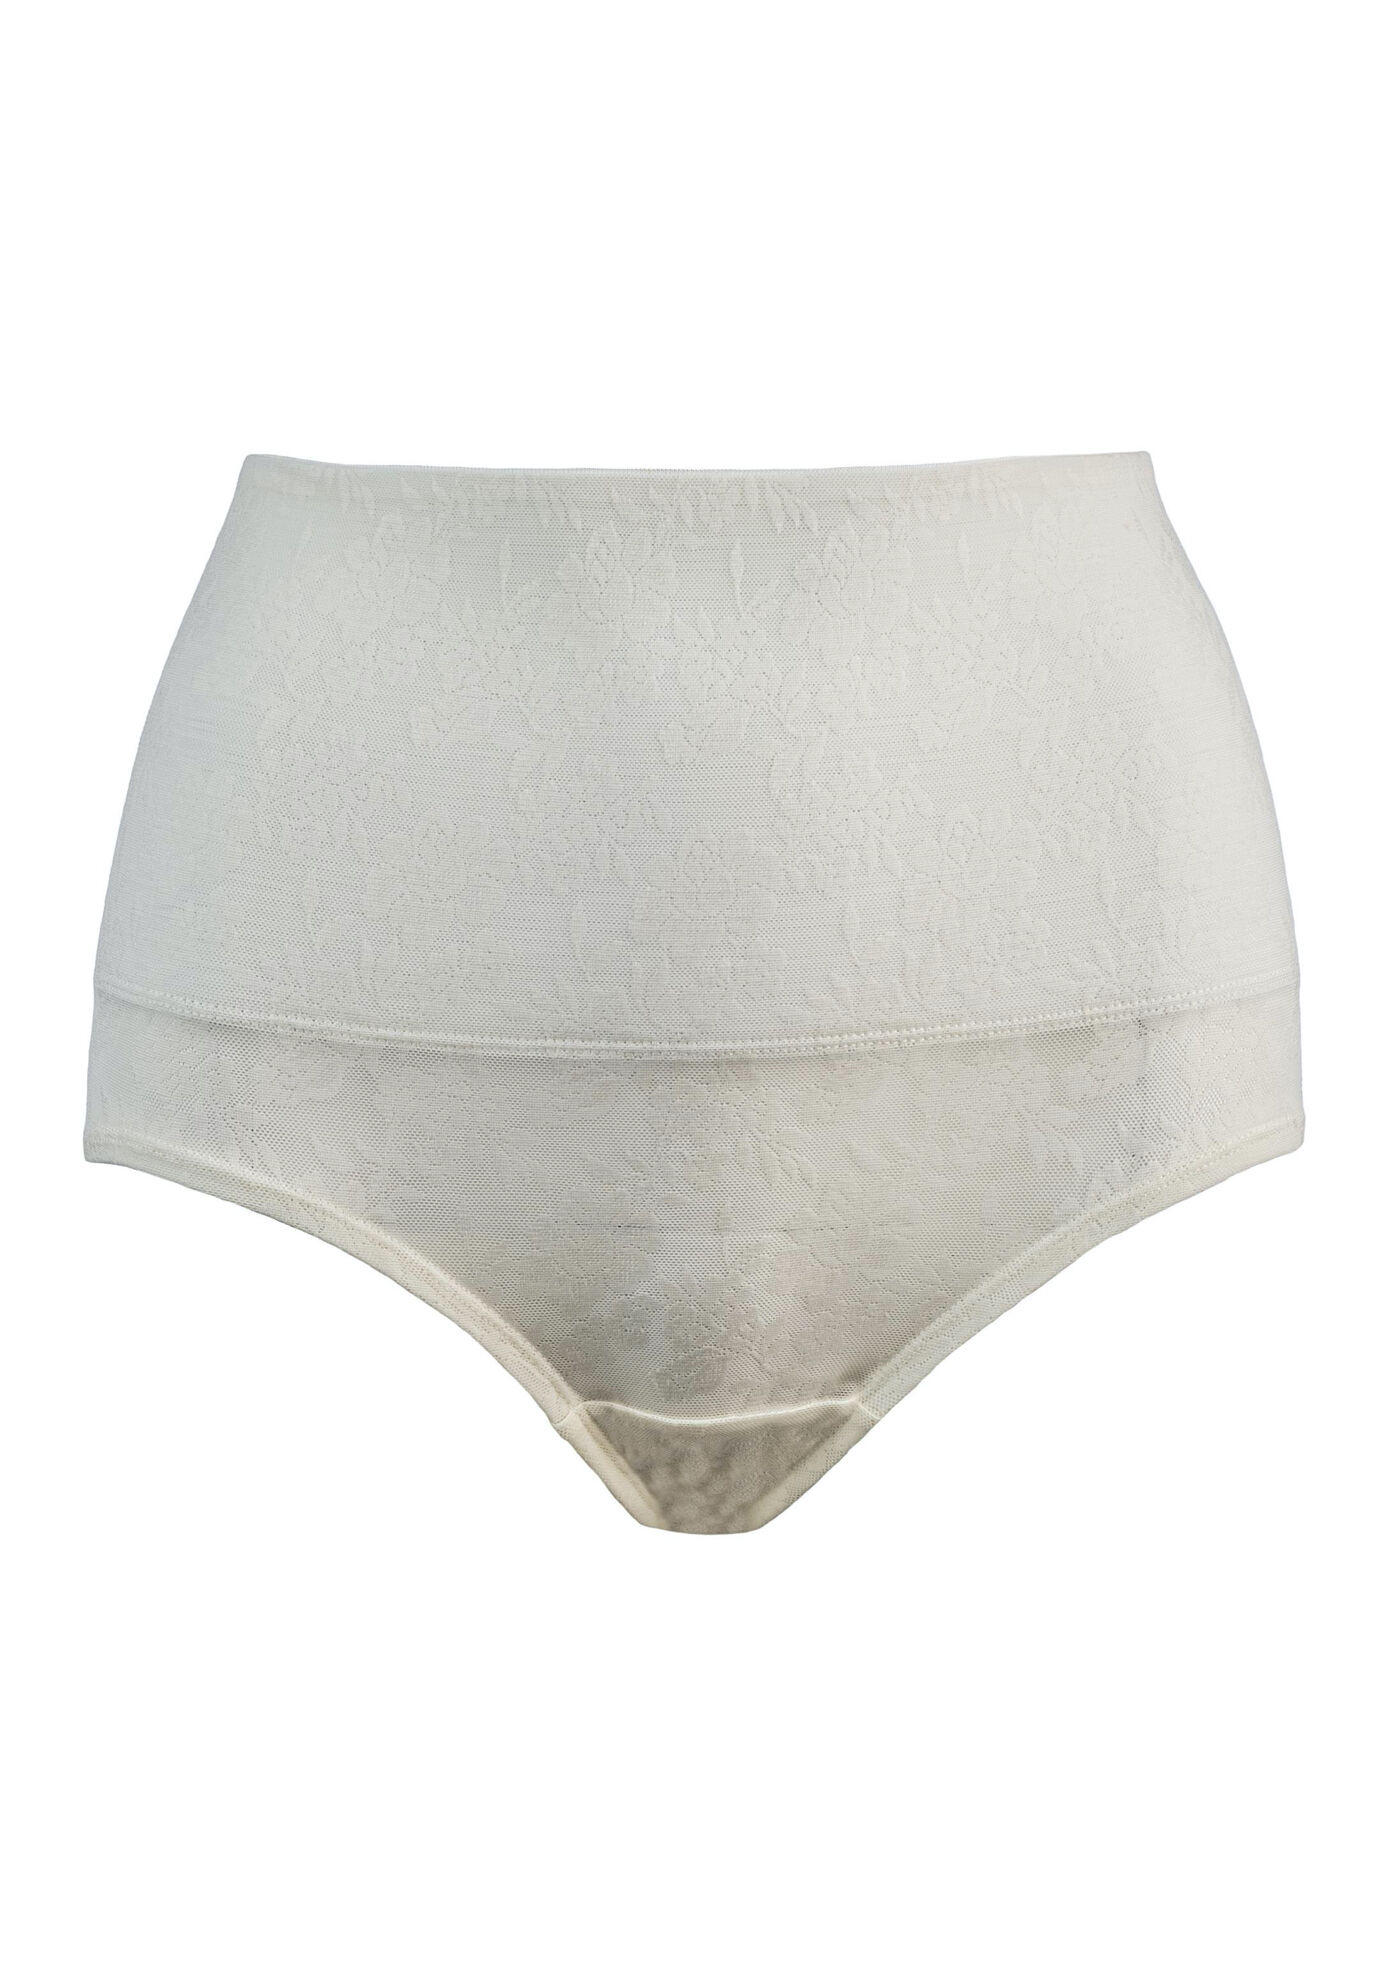 Plus Size Women's Belly Band Brief by Rago in Pearl White (Size 7X)